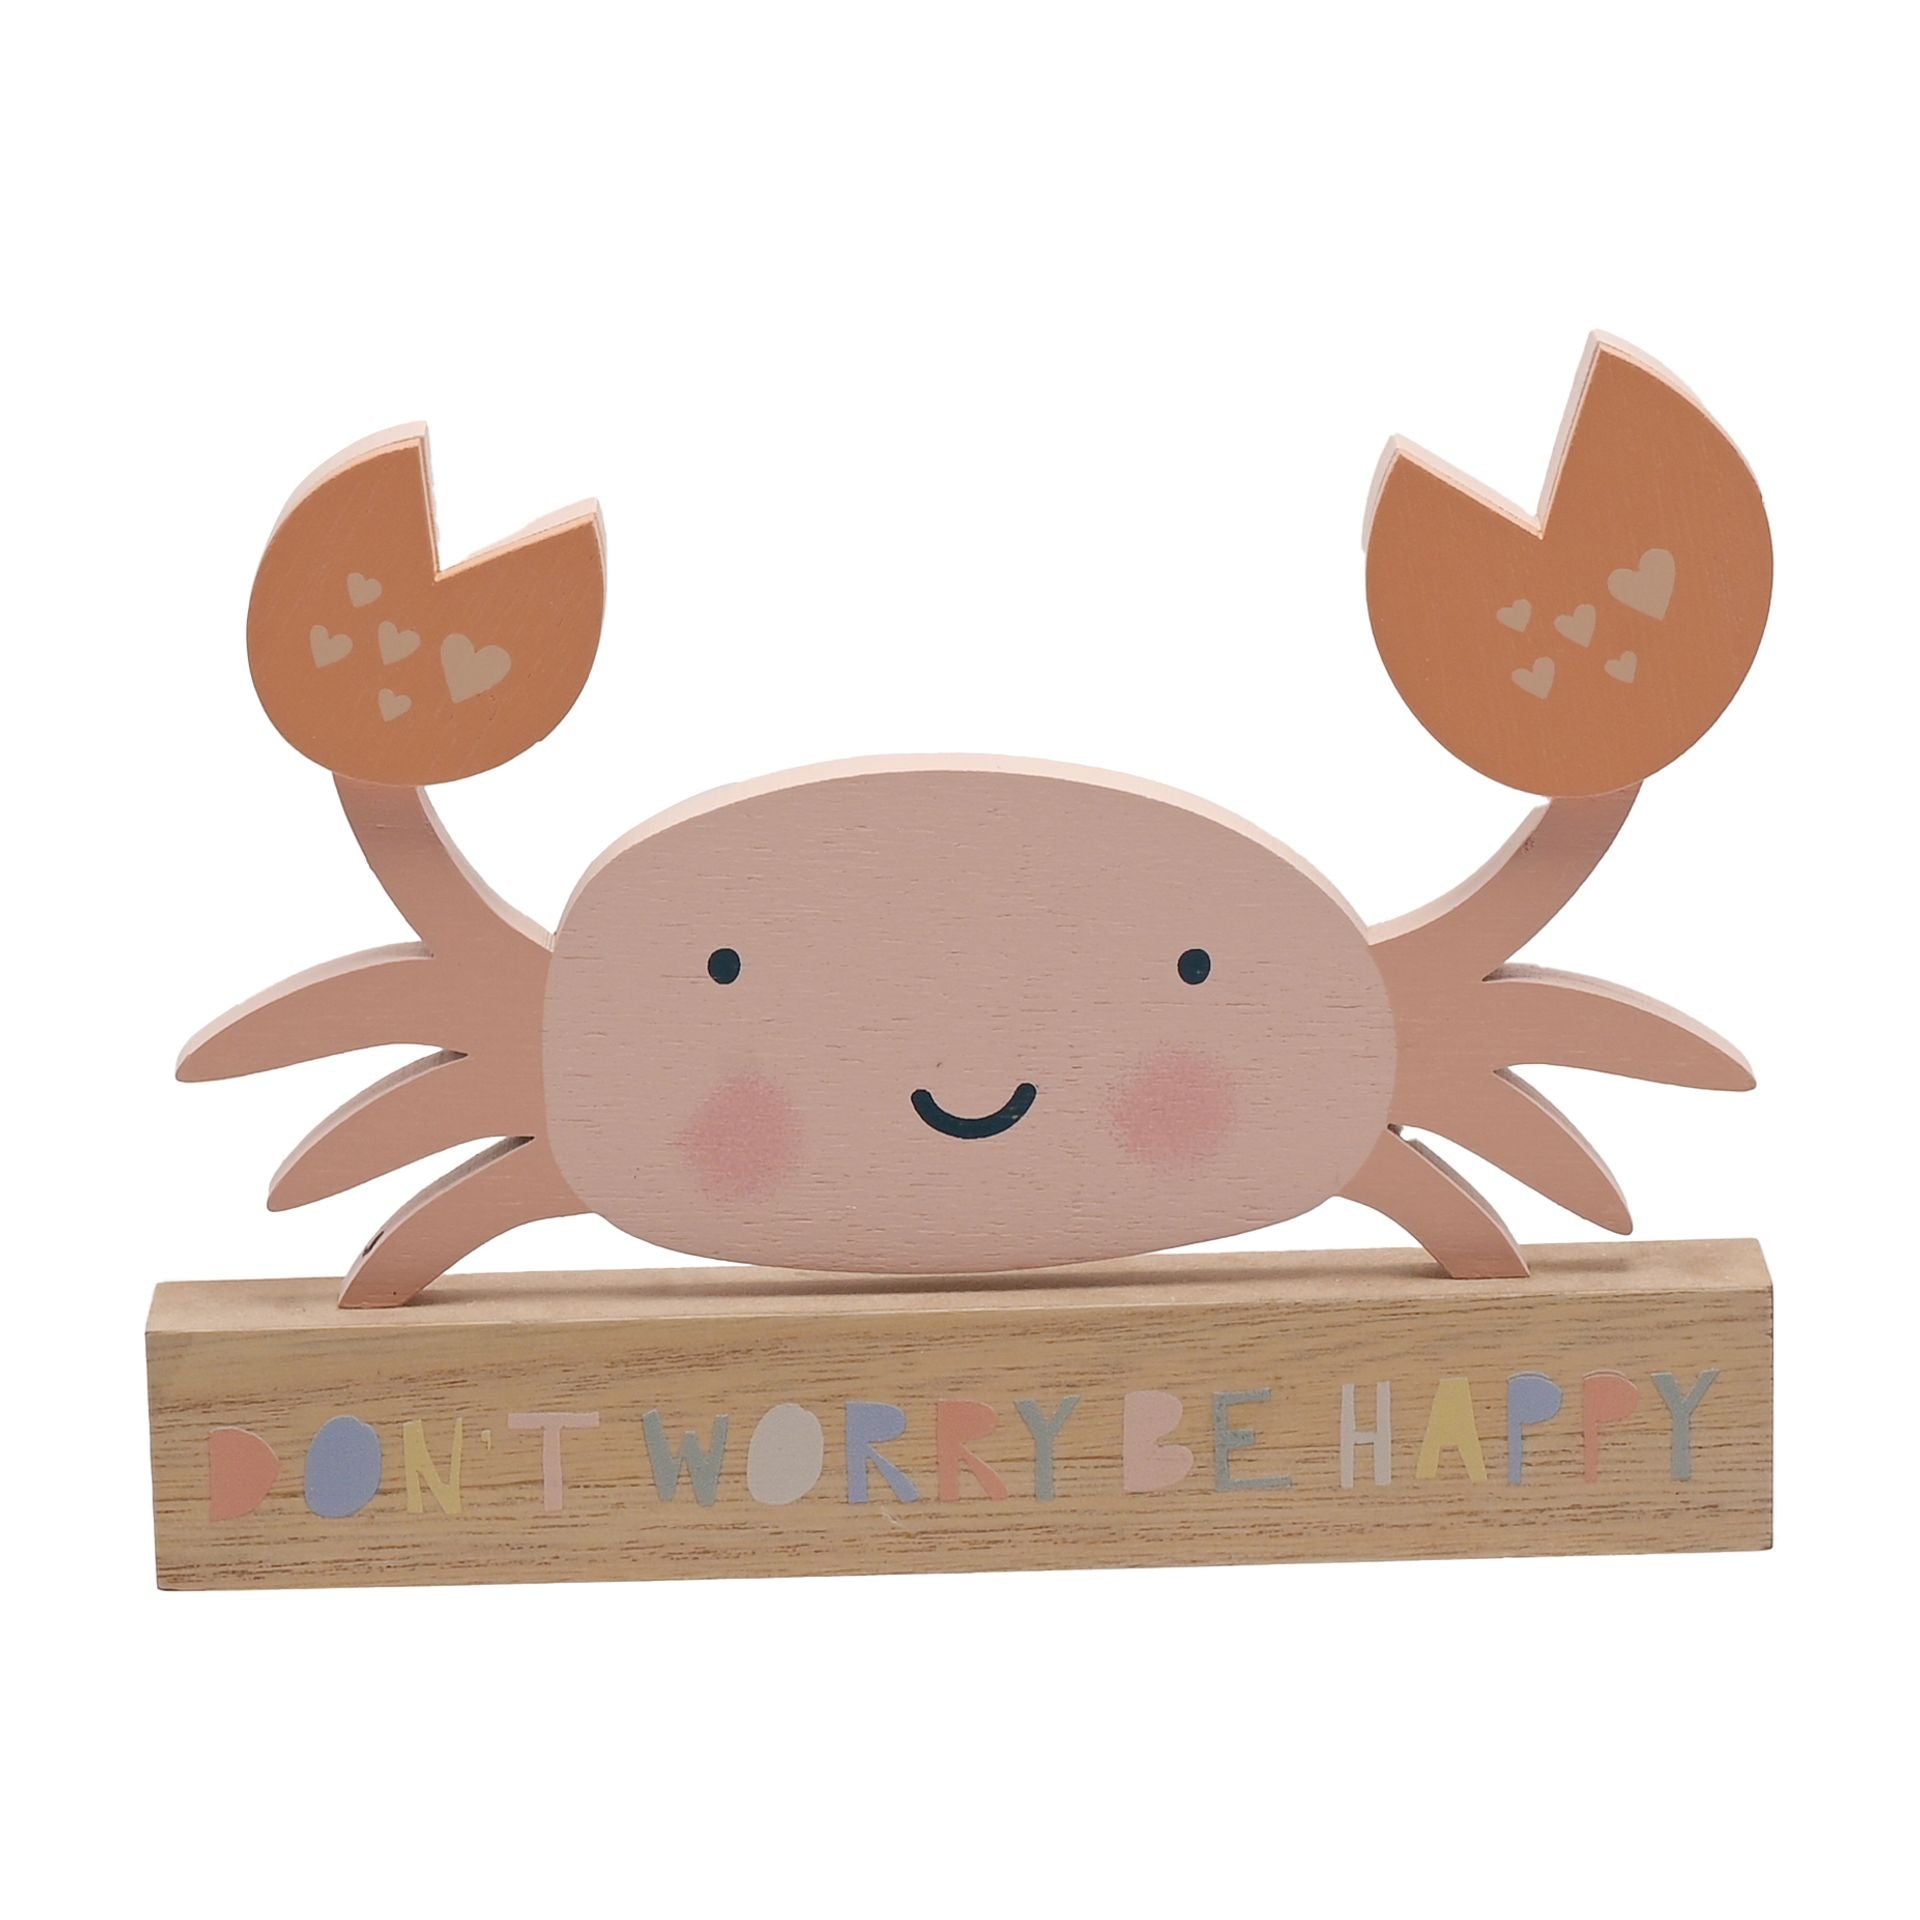 Our Crab Mantel Plaque is a gorgeous addition to any child's bedroom. Featuring a don’t worry be happy message, this wooden plaque is decorated with an adorable pink crab.